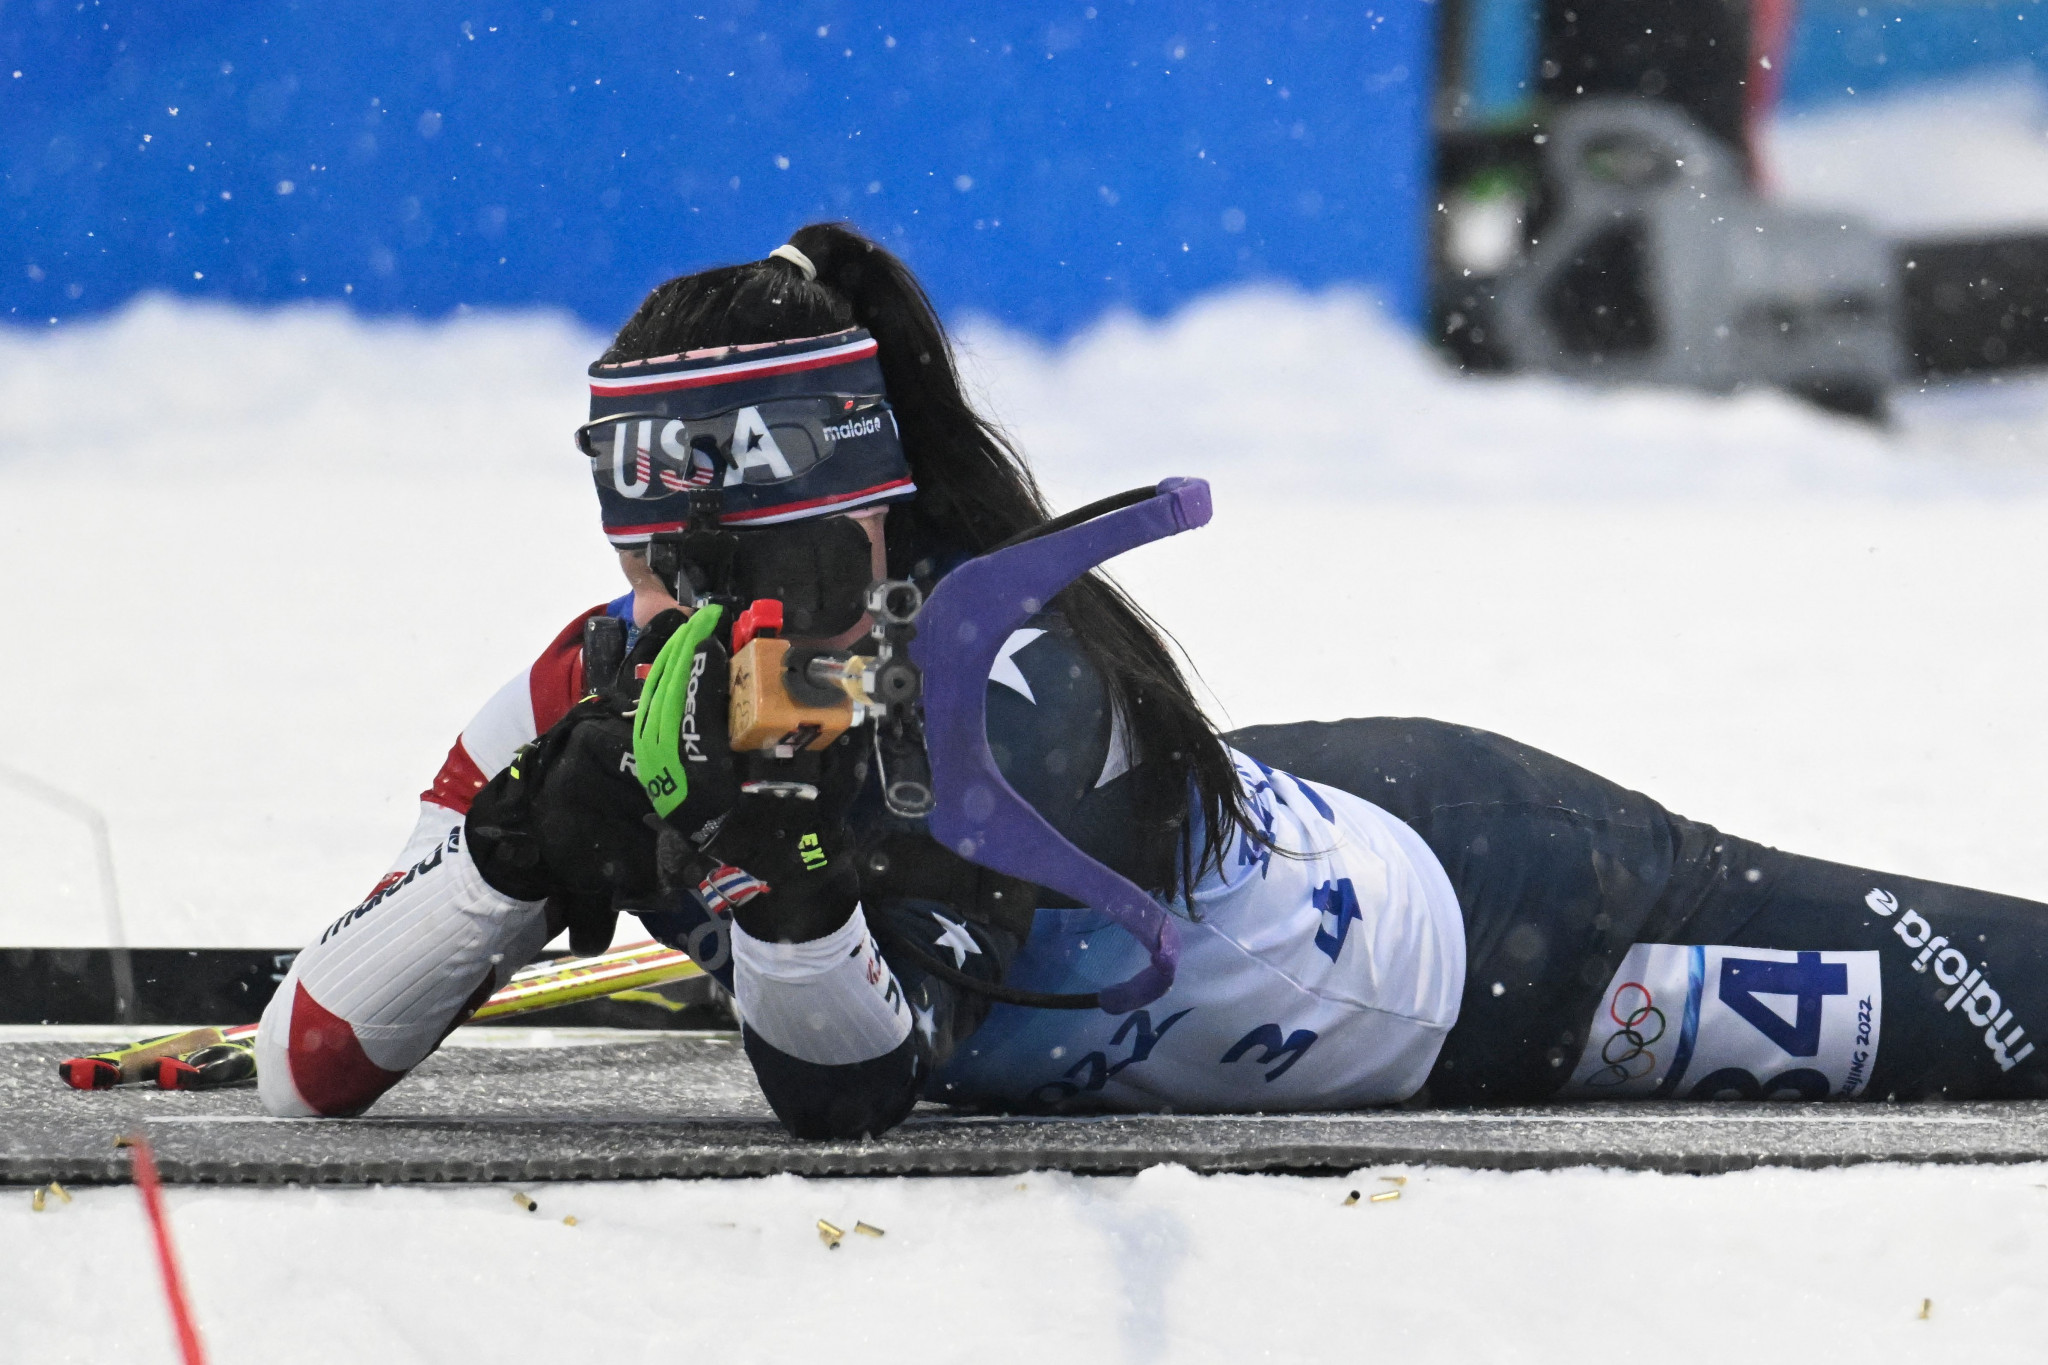 John Farra will focus on talent identification among junior and collegiate cross-country skiers and providing a pathway to transfer their skills to biathlon ©Getty Images